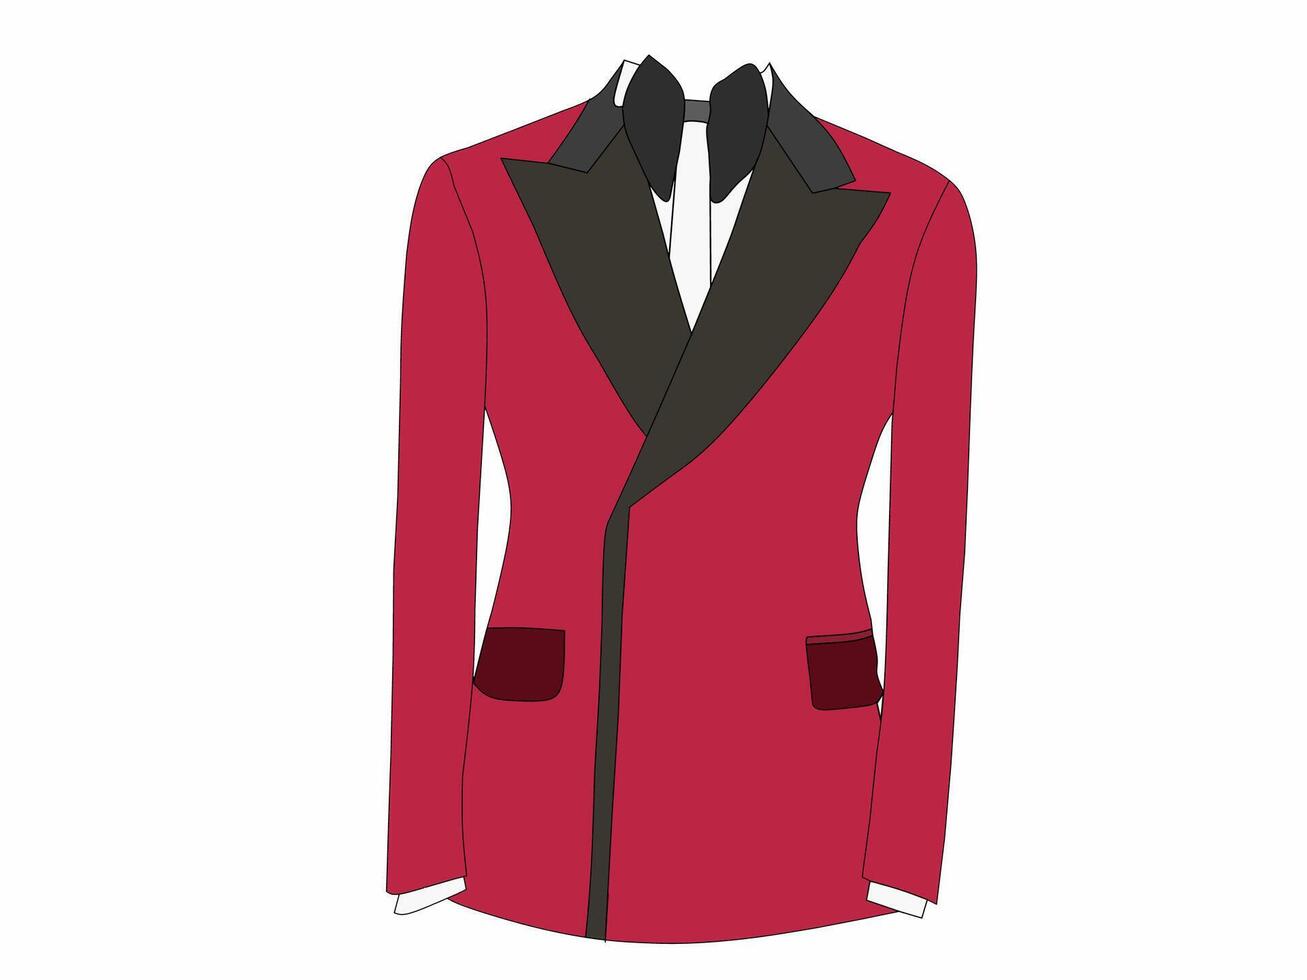 Vector illustration of a Tuxedo dress in dark red on a white background. The theme of fashion clothing is based on business and work.